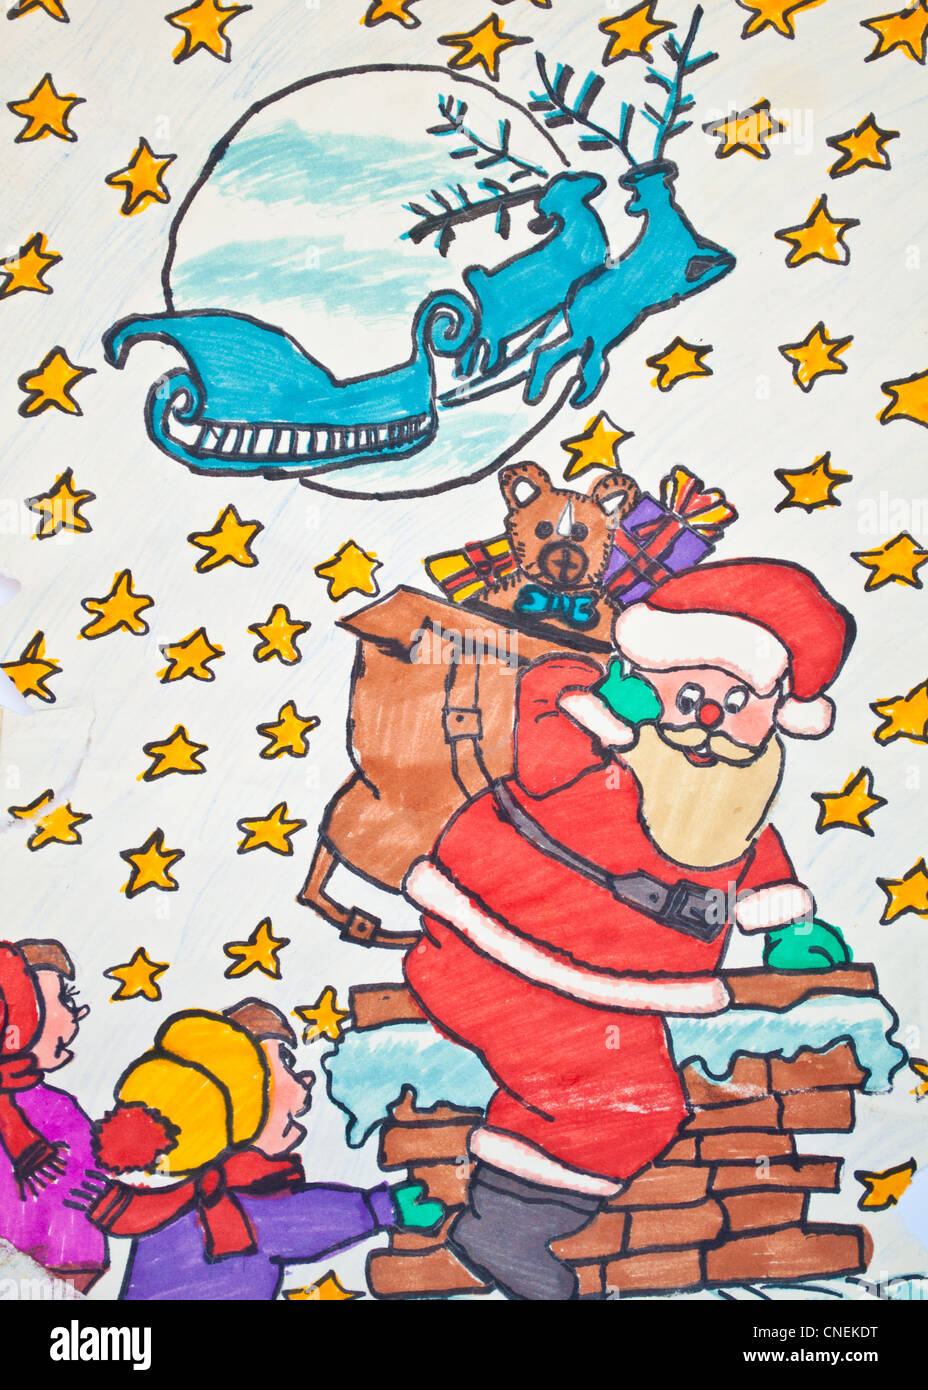 Child's drawing of Santa Claus holding guft bag with children ...